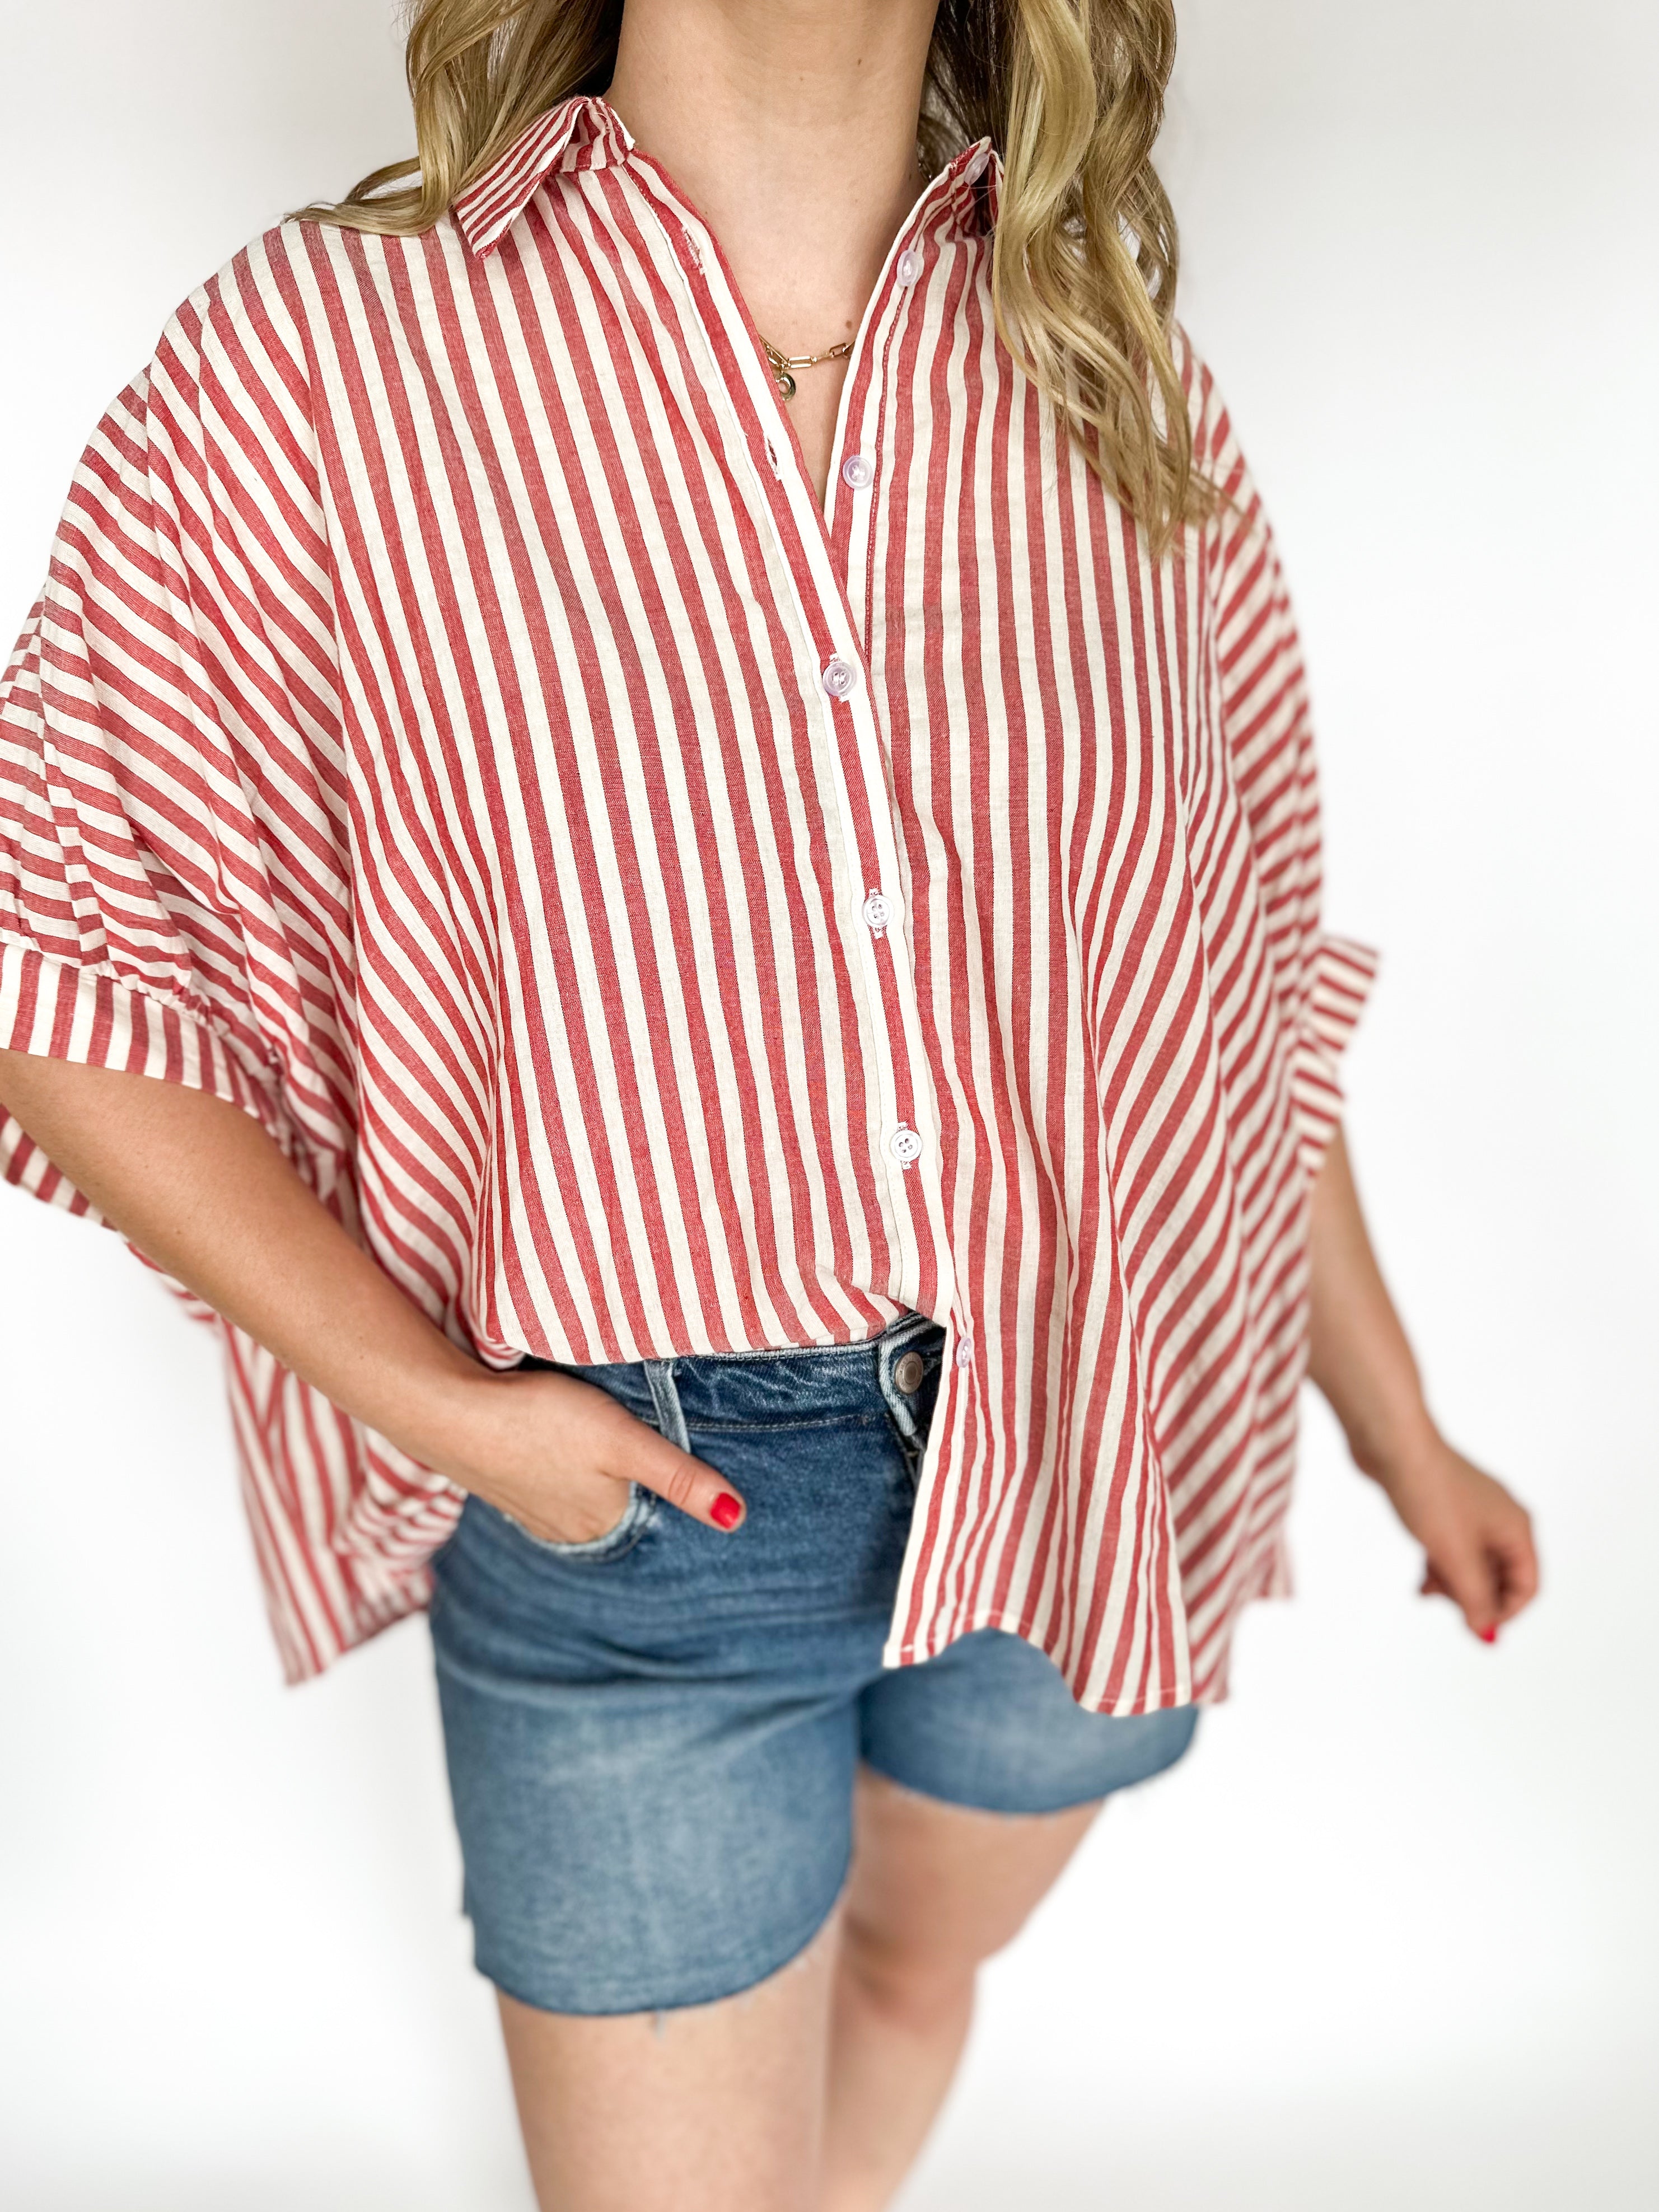 American Girl Oversized Blouse - Red-200 Fashion Blouses-DAY + MOON-July & June Women's Fashion Boutique Located in San Antonio, Texas